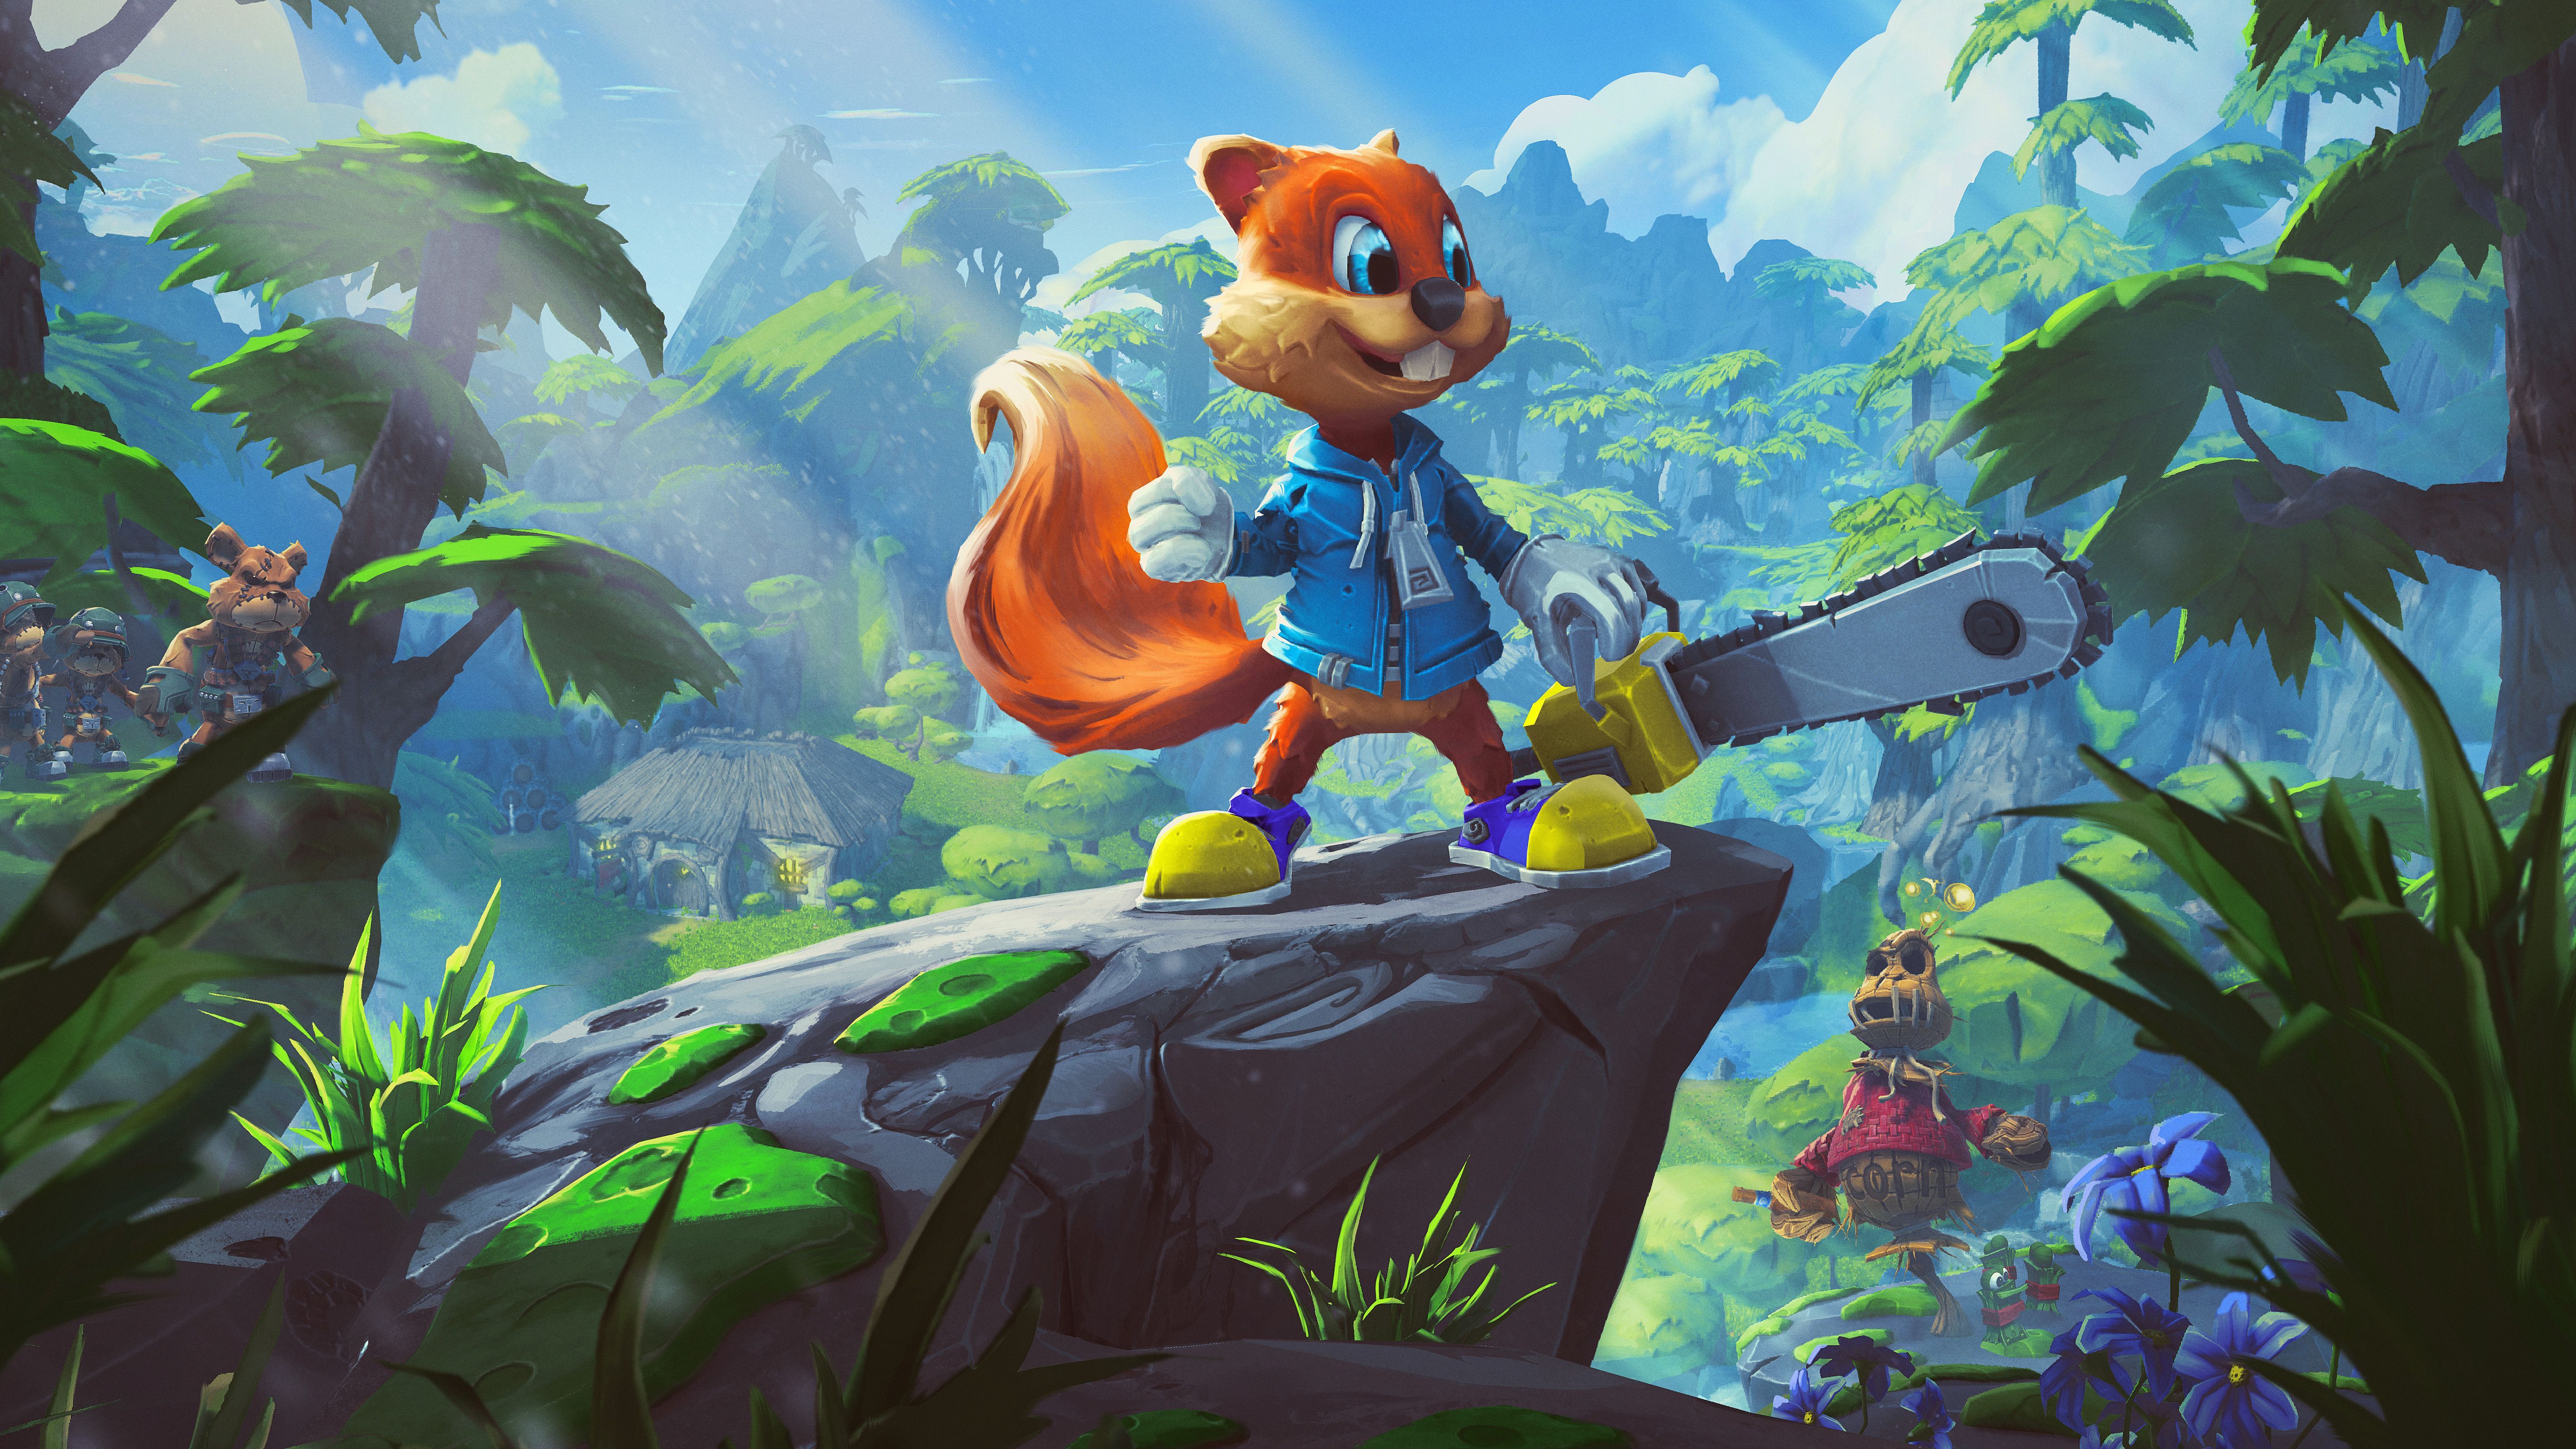 Conker's Big Reunion! Join Conker 10 years after the events of Conker's Bad Fur Day with a quest of most pressing matters.. Conkers, Conker's bad fur day, Artwork